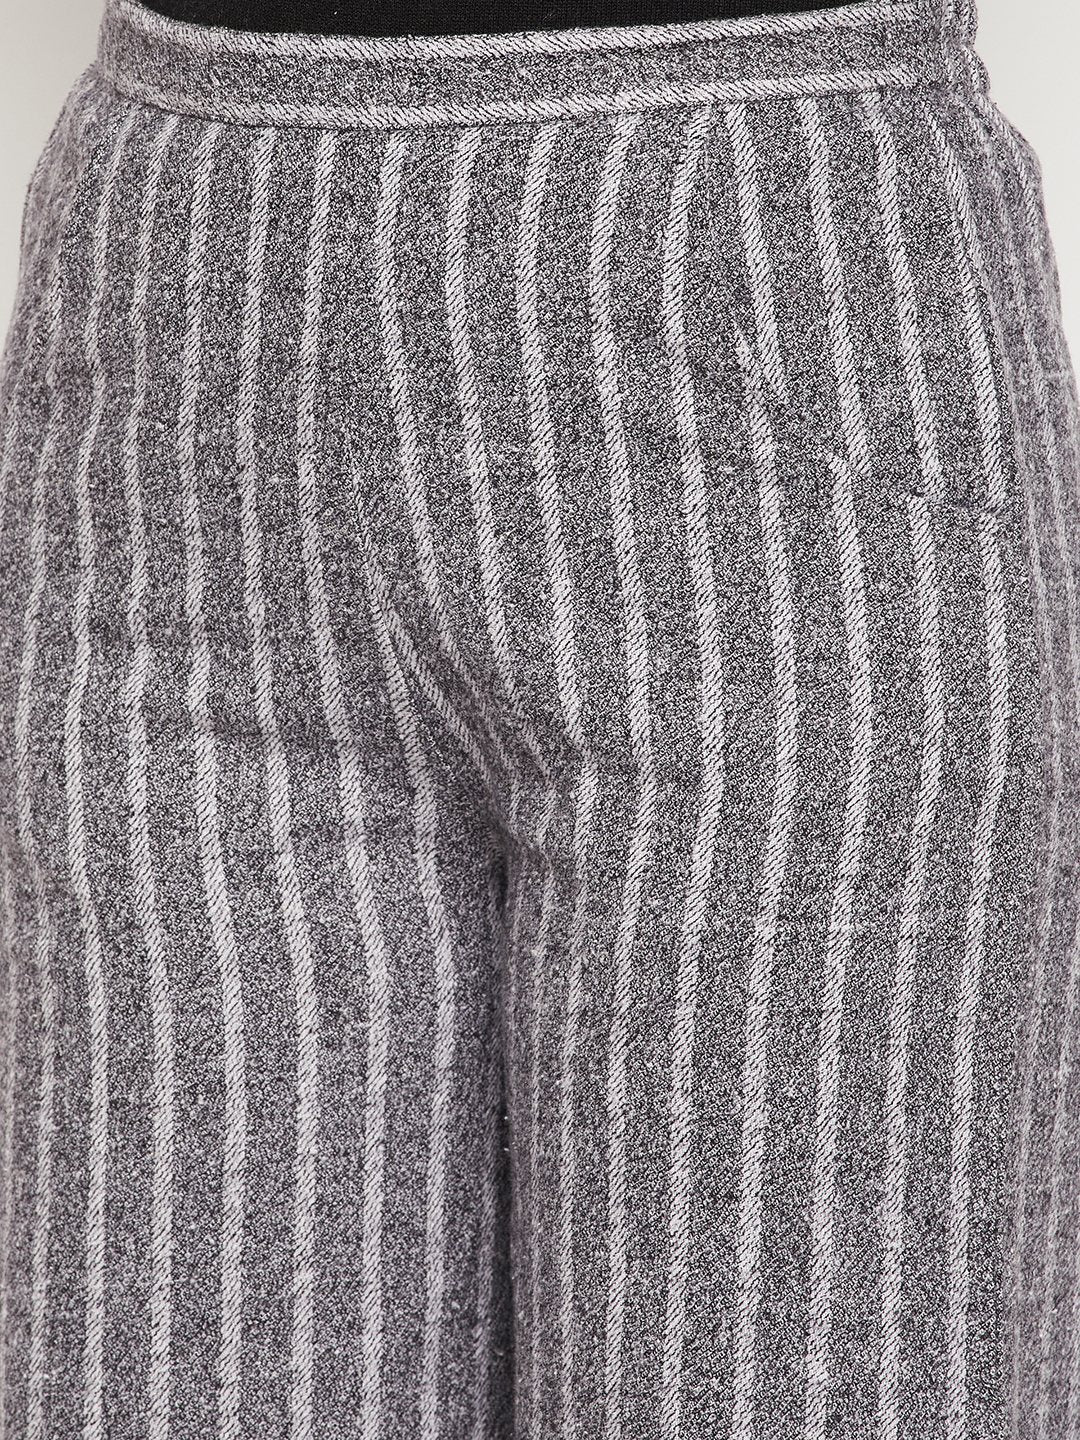 Women Striped Relaxed Flared Wrinkle Free Cotton Trousers